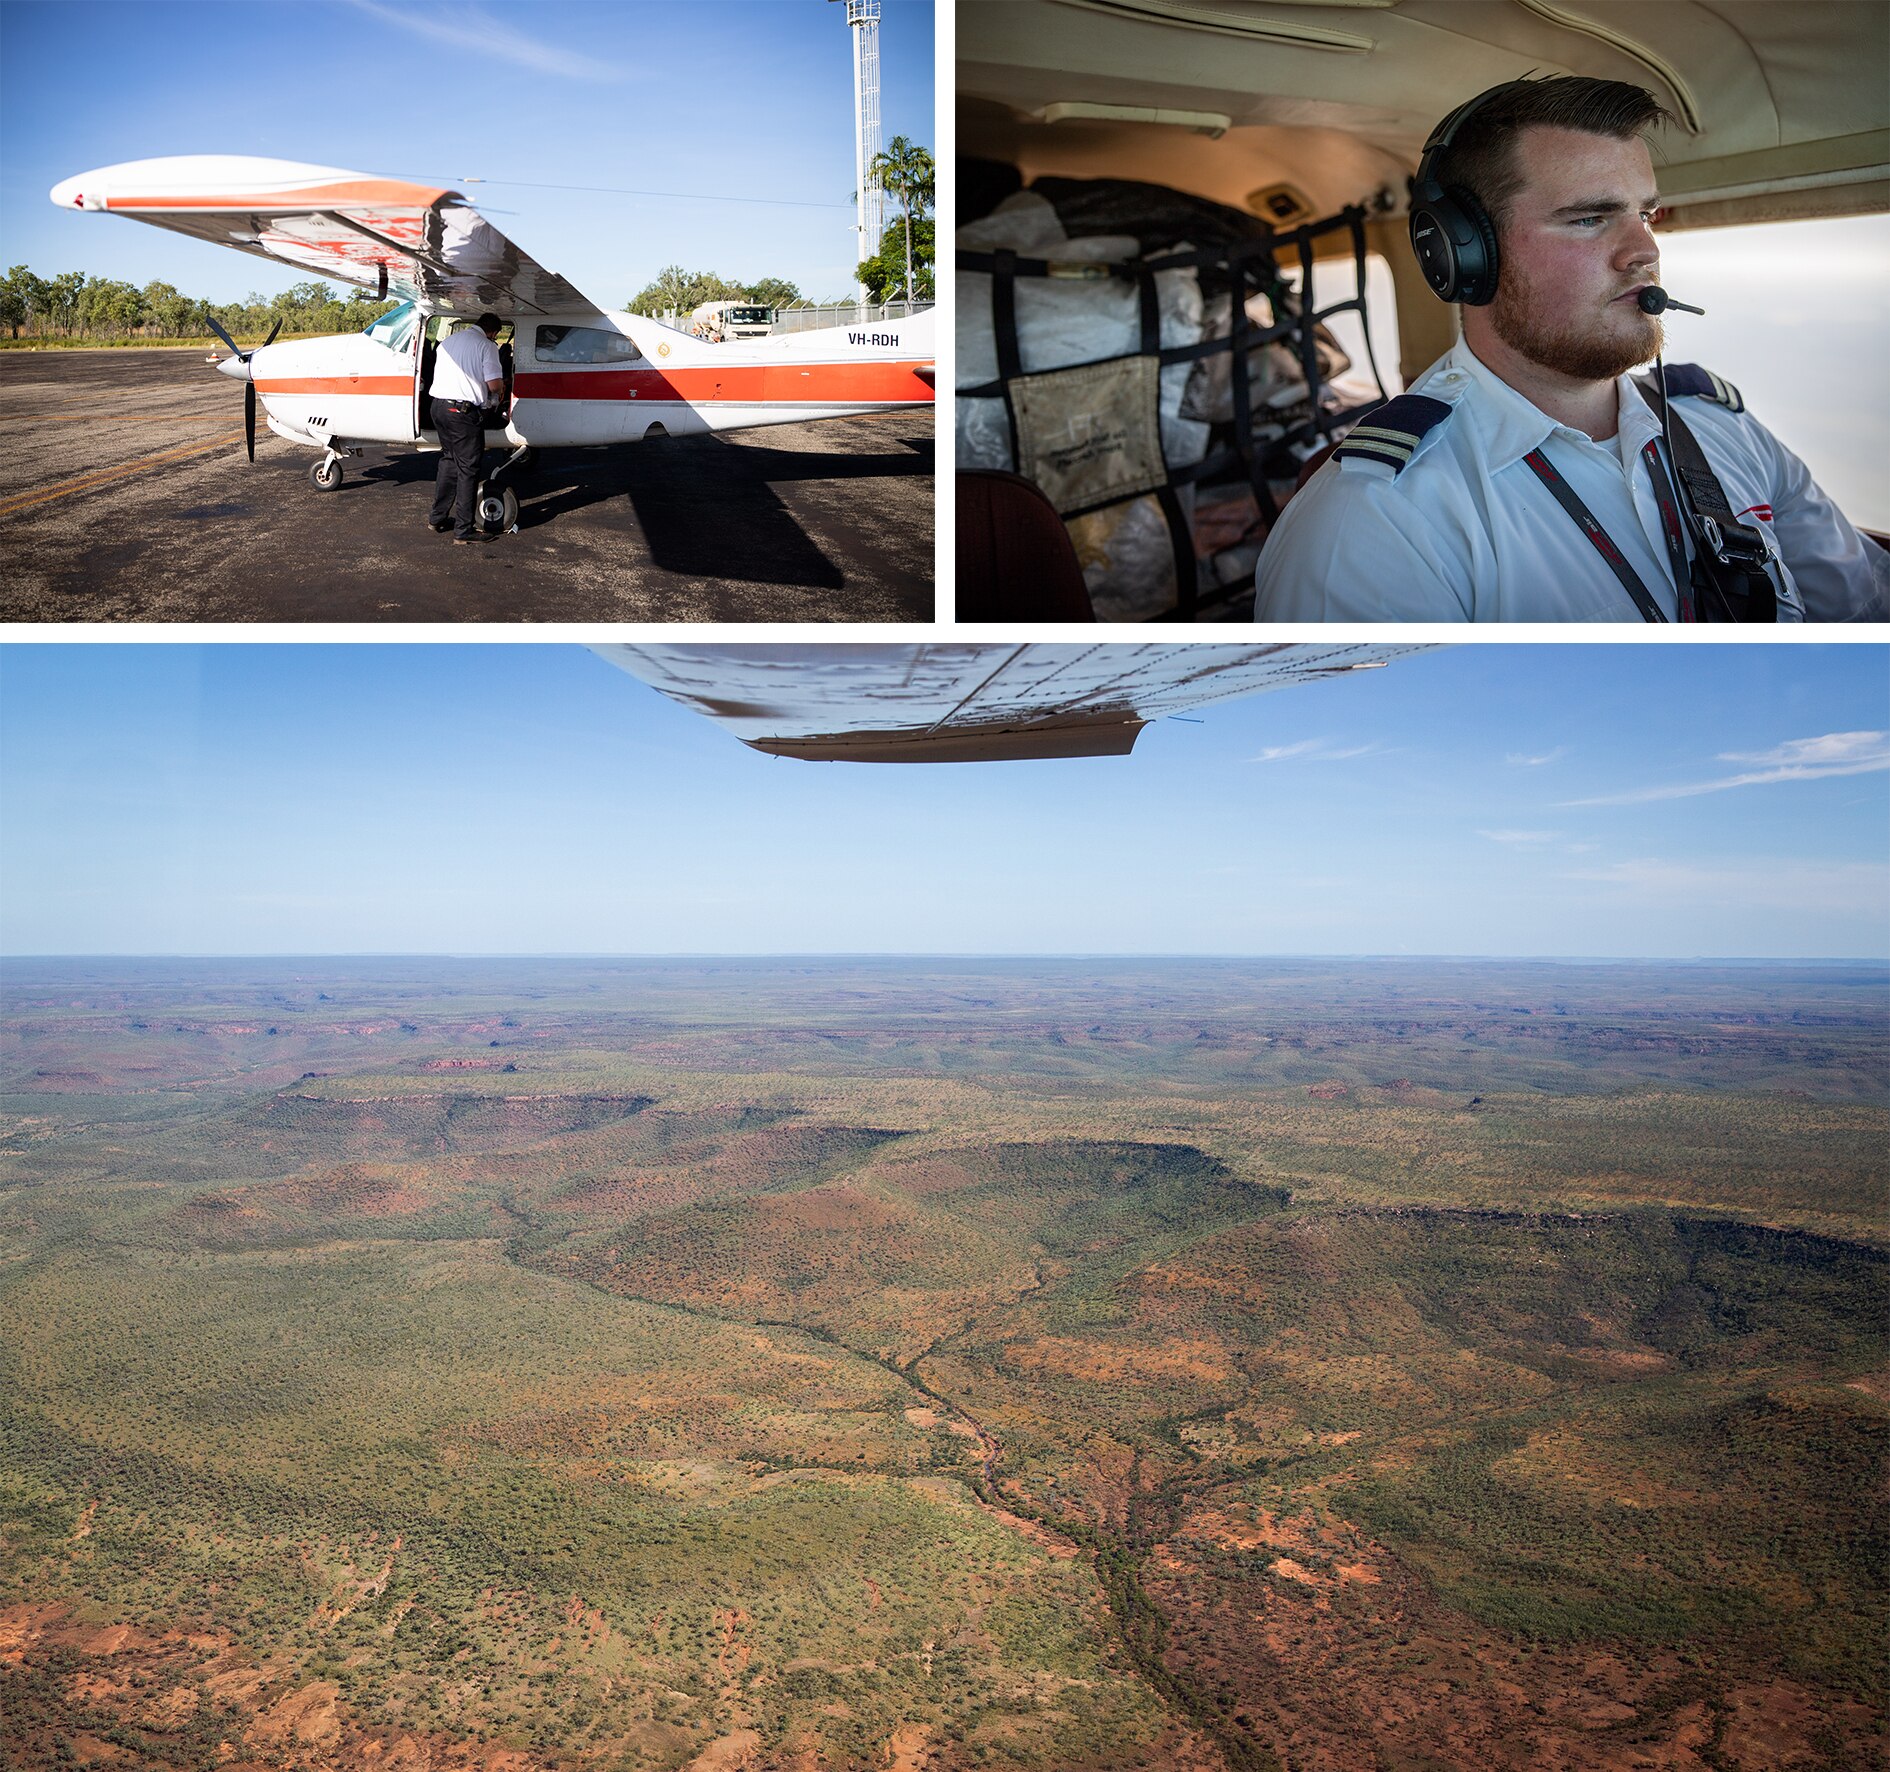 A grid of three photos showing a young male pilot, small six-seater plane and vast outback landscape from above.